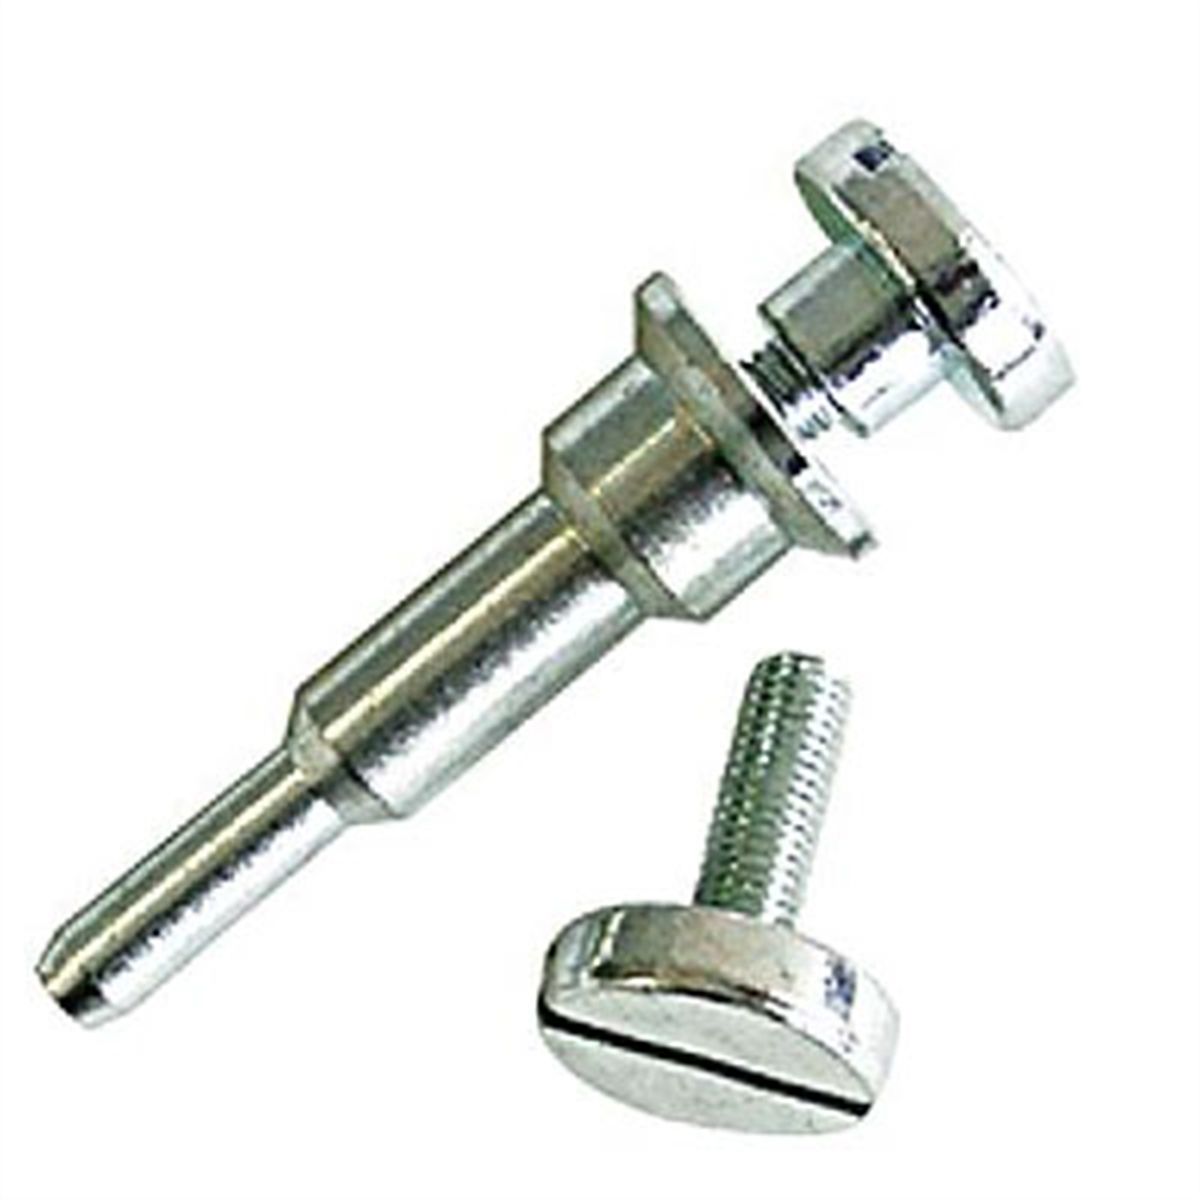 Mandrel Set for Cut-off Wheels Contains 2 pieces - 3/8" Screw an